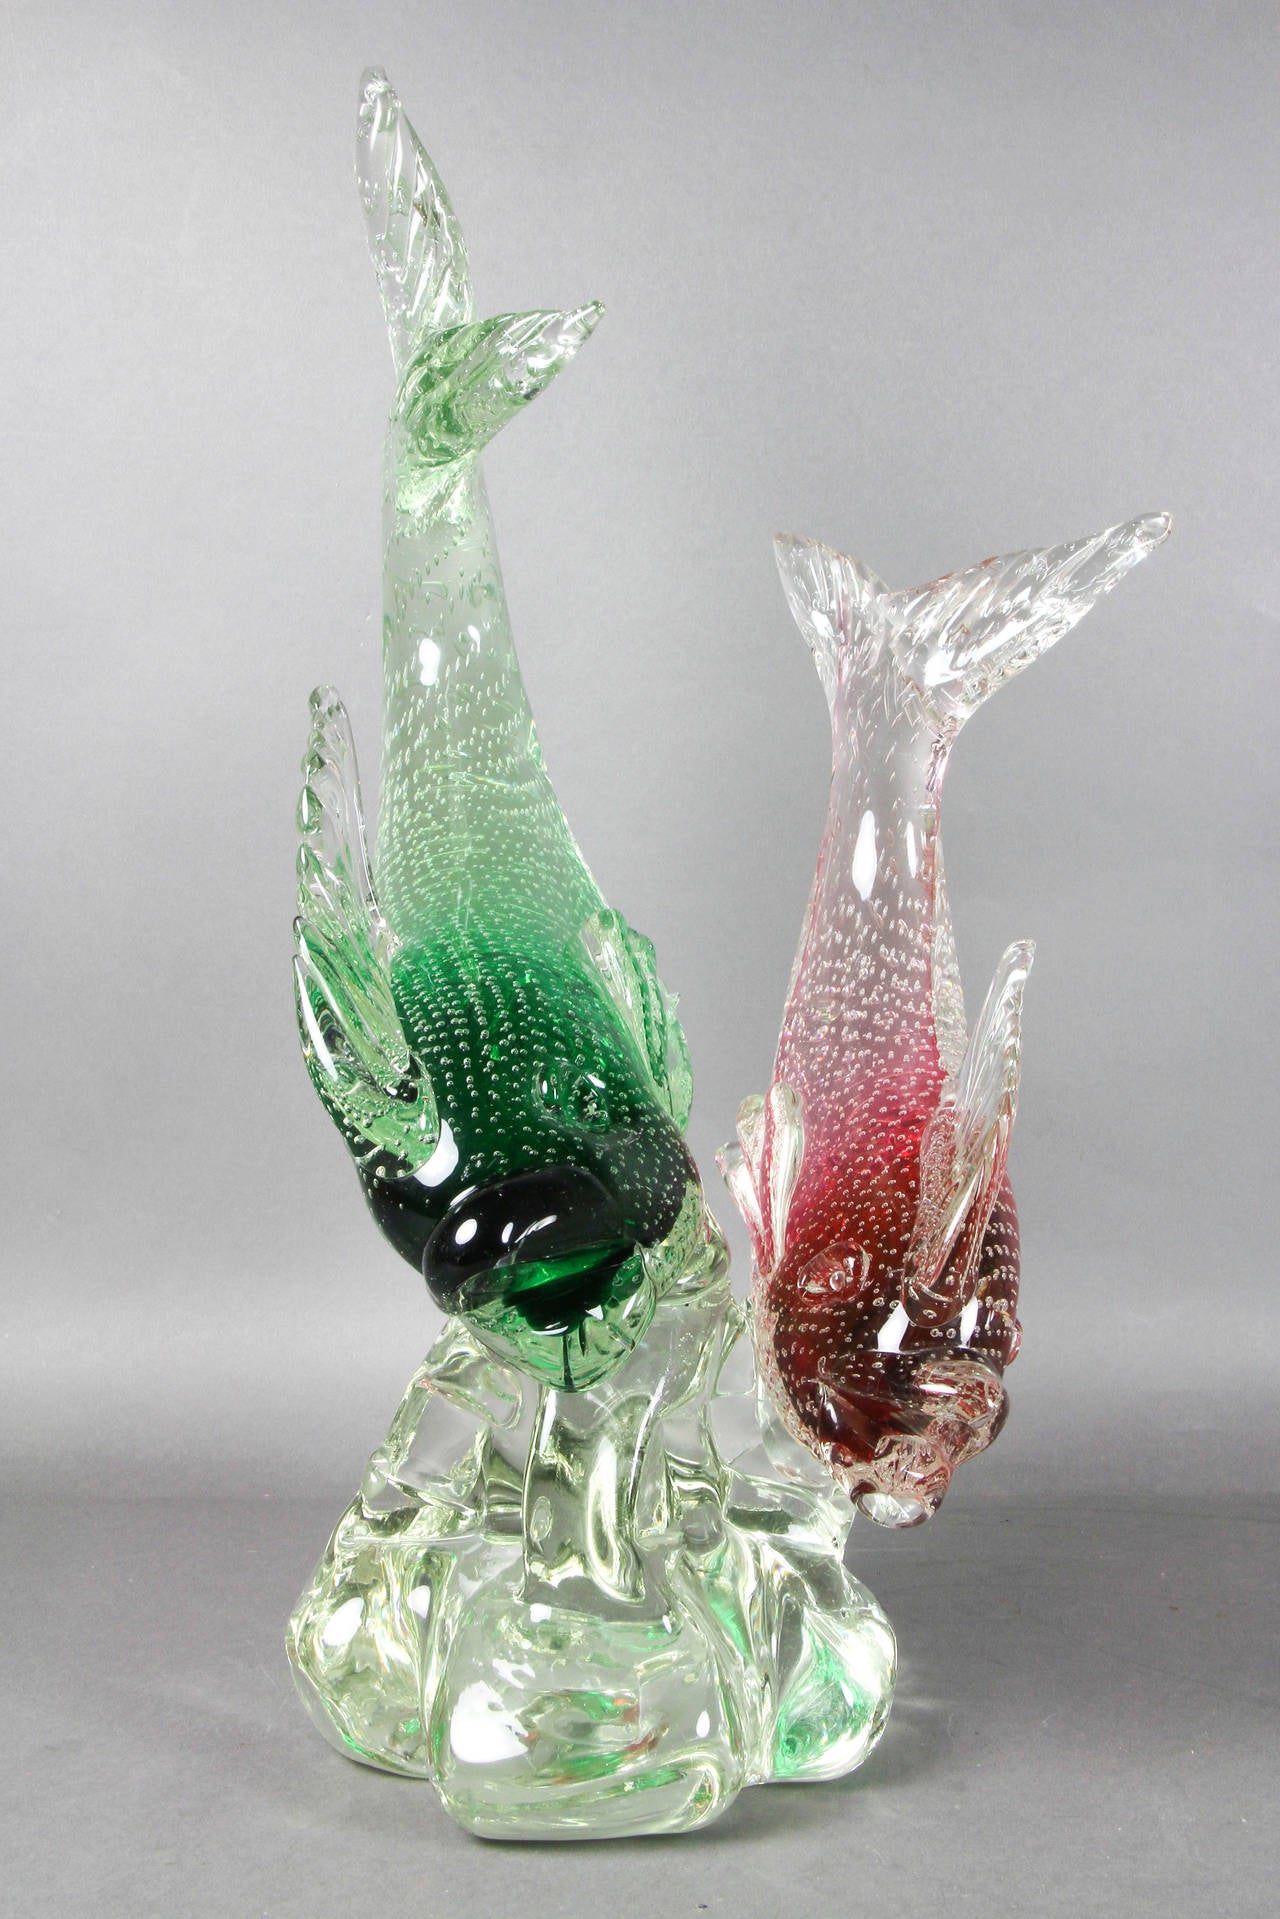 One red and one green fish on a molded glass base.